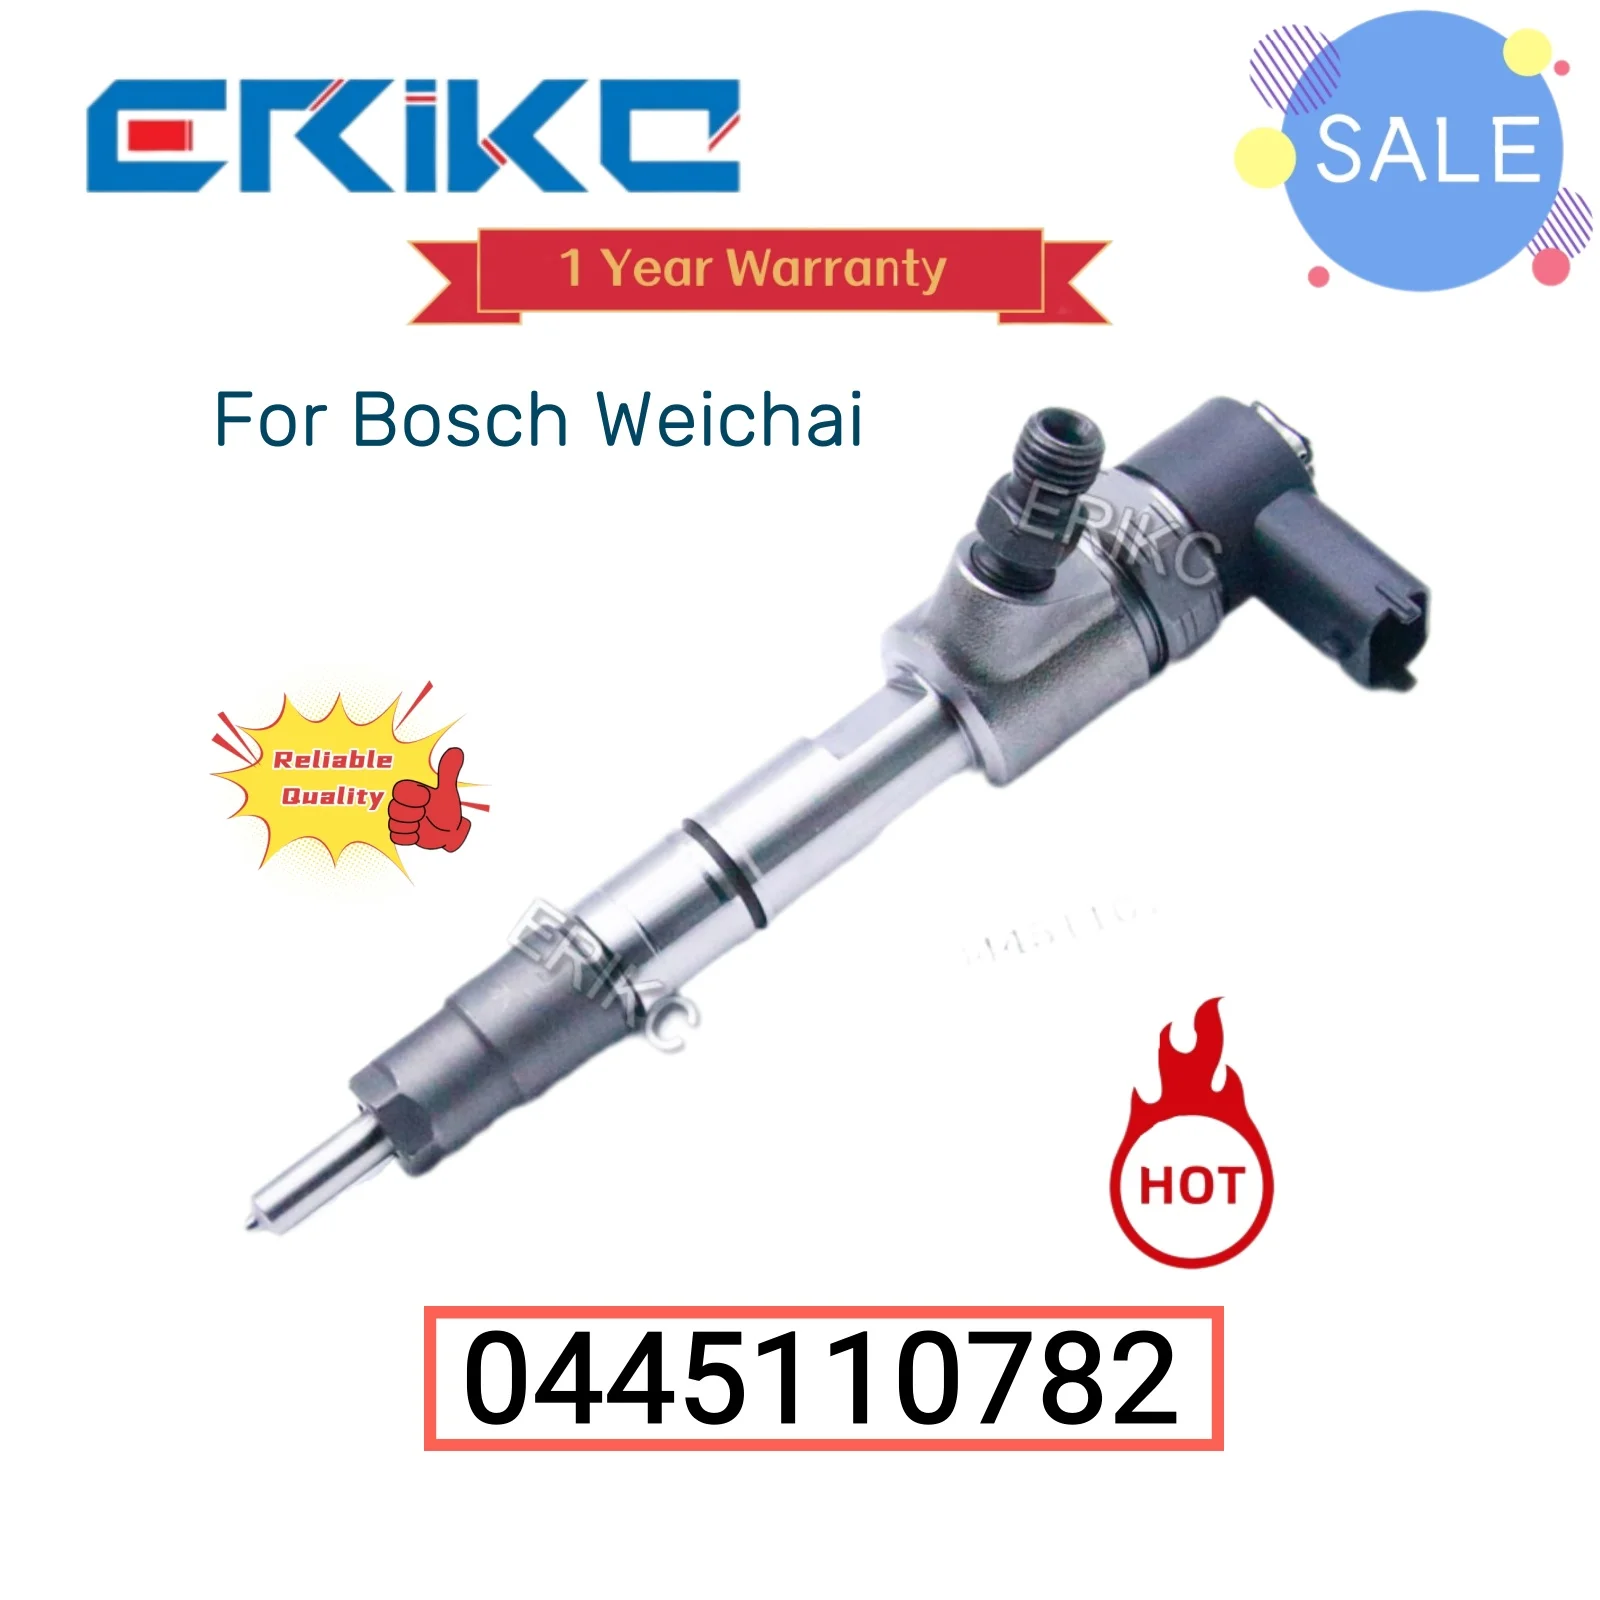 

0445110782 Nozzle Injector 0 445 110 782 Injector Assy Fuel 0445 110 782 Common Rail Diesel Injector for Bosch Weichai